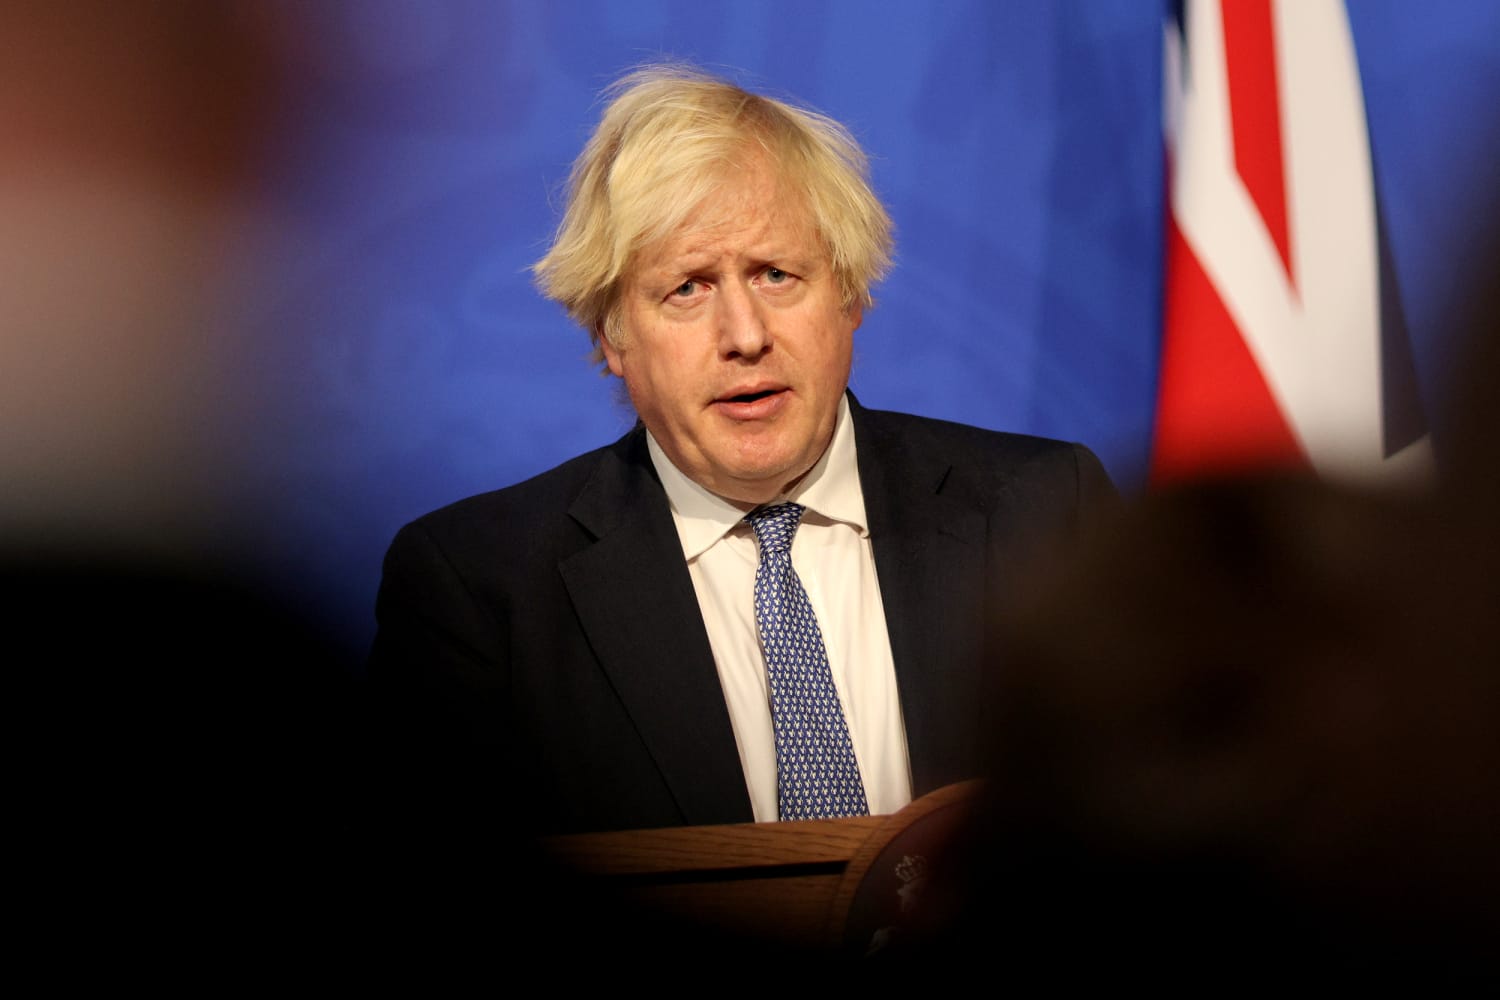 U.K. PM Boris Johnson under fire over ‘bring your own booze’ lockdown party